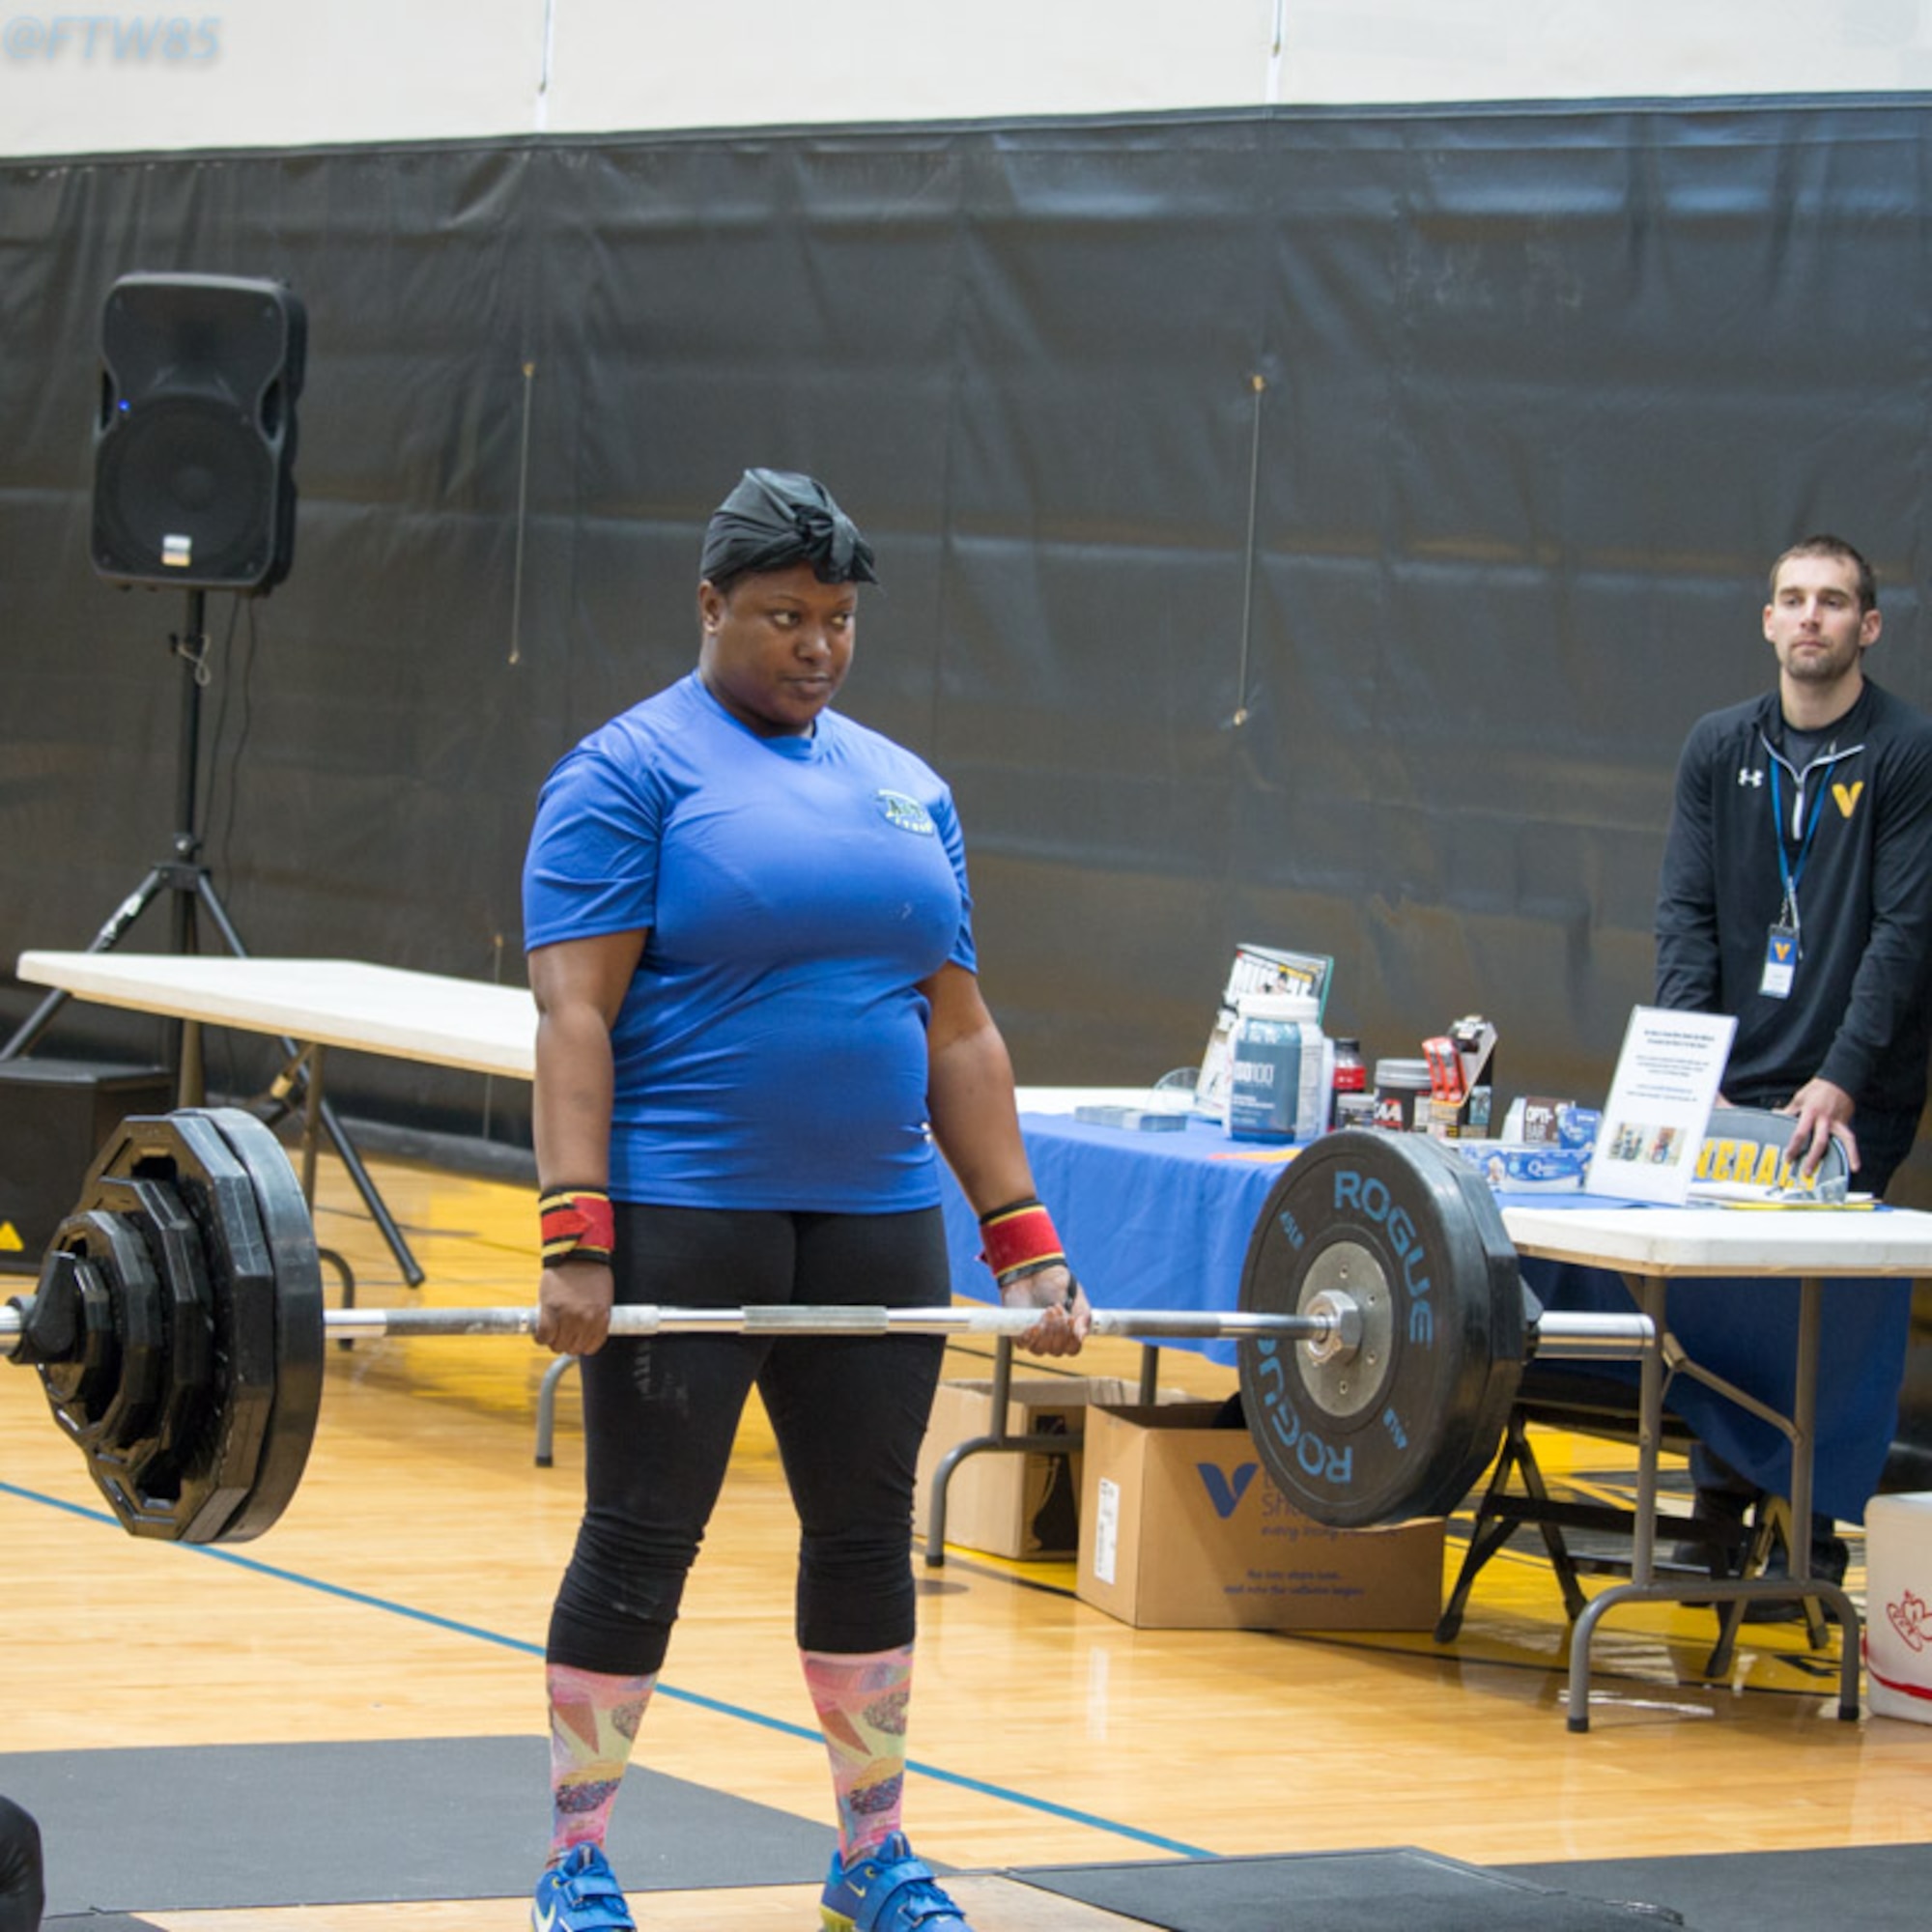 Tech. Sgt. Natasha Fenton executes a clean dead lift at the Joint Base Myer-Henderson Hall Inaugural Powerlifting Meet Oct. 29, 2016. (Courtesy photo)  